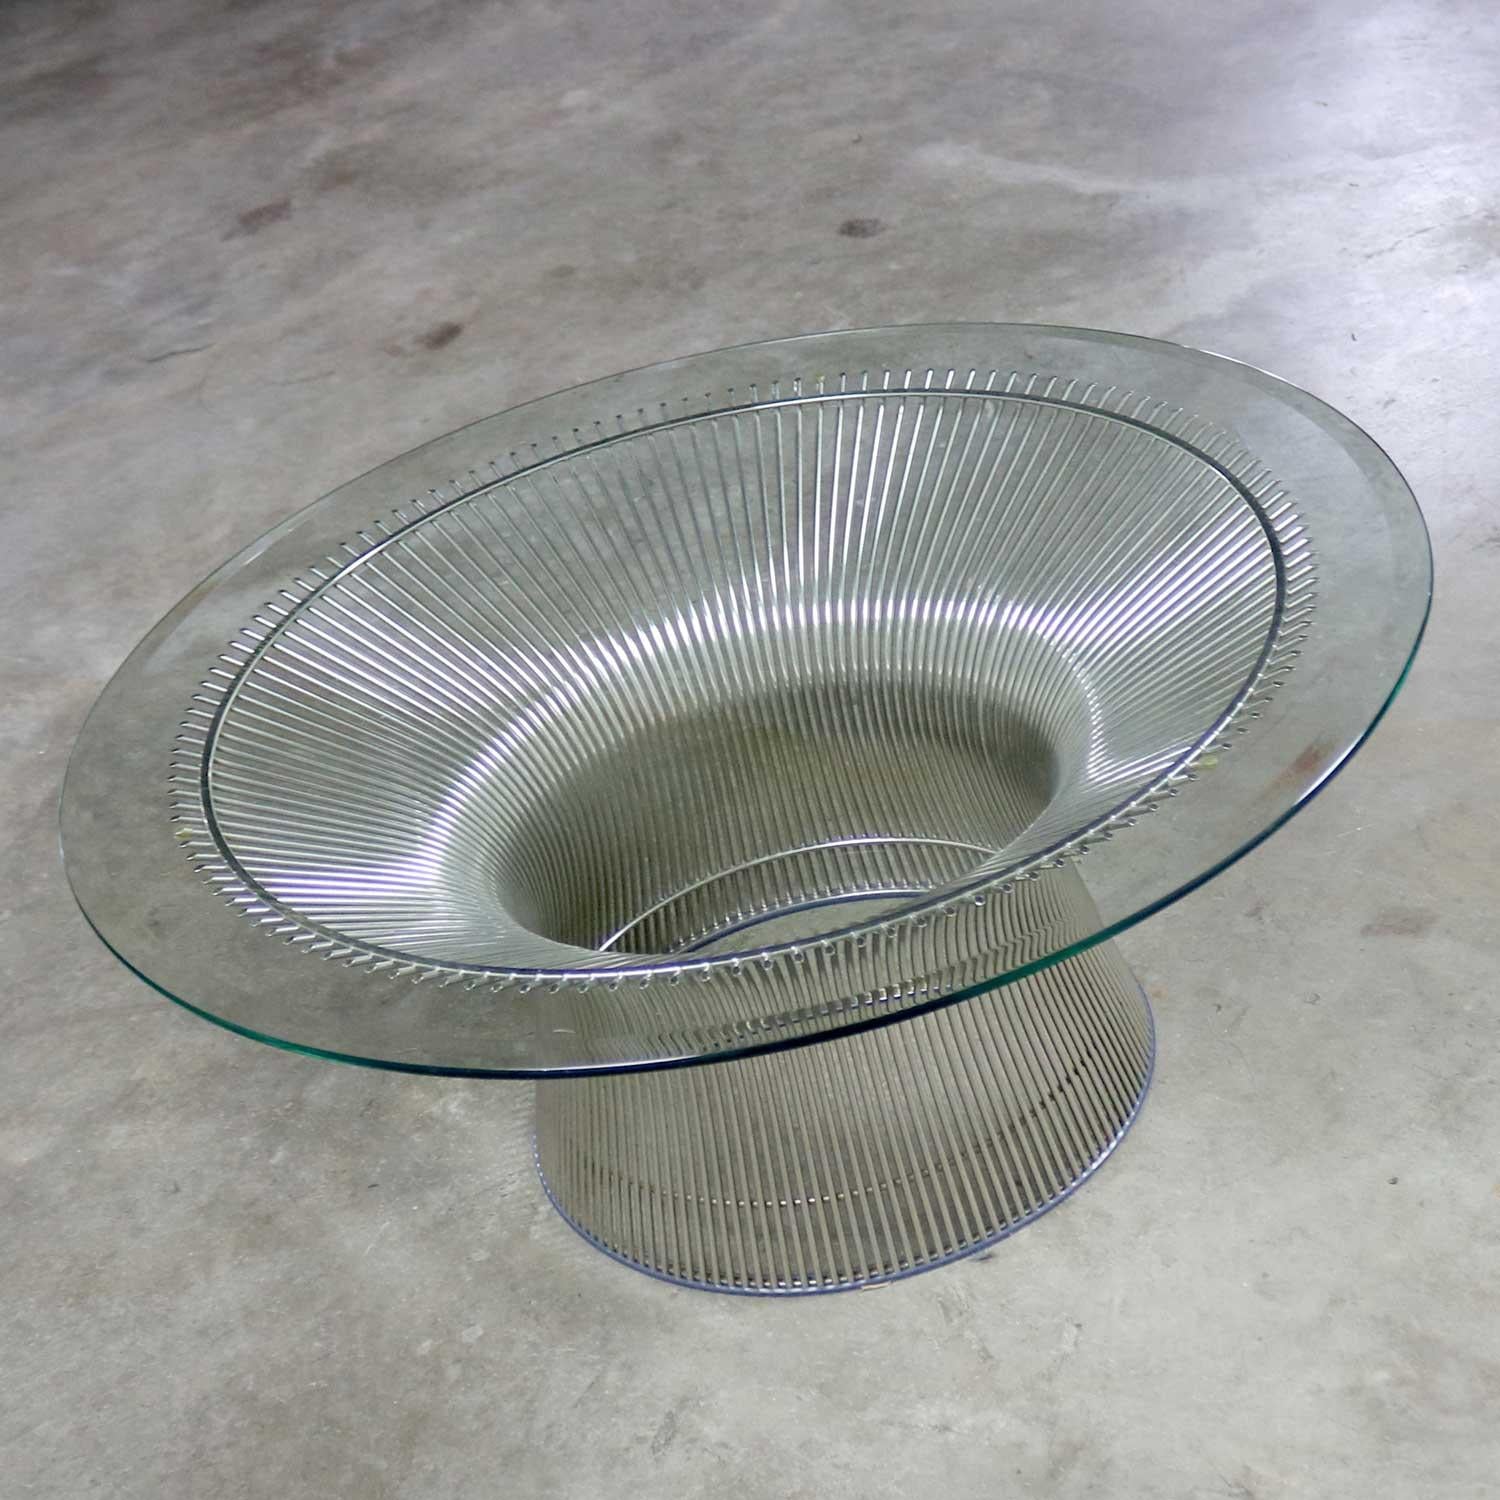 Handsome and iconic nickel steel rod coffee table with 35.5-inch round beveled glass top designed by Warren Platner for Knoll. It is in fabulous vintage condition. The glass may have some small signs of use but nothing outstanding. Please see